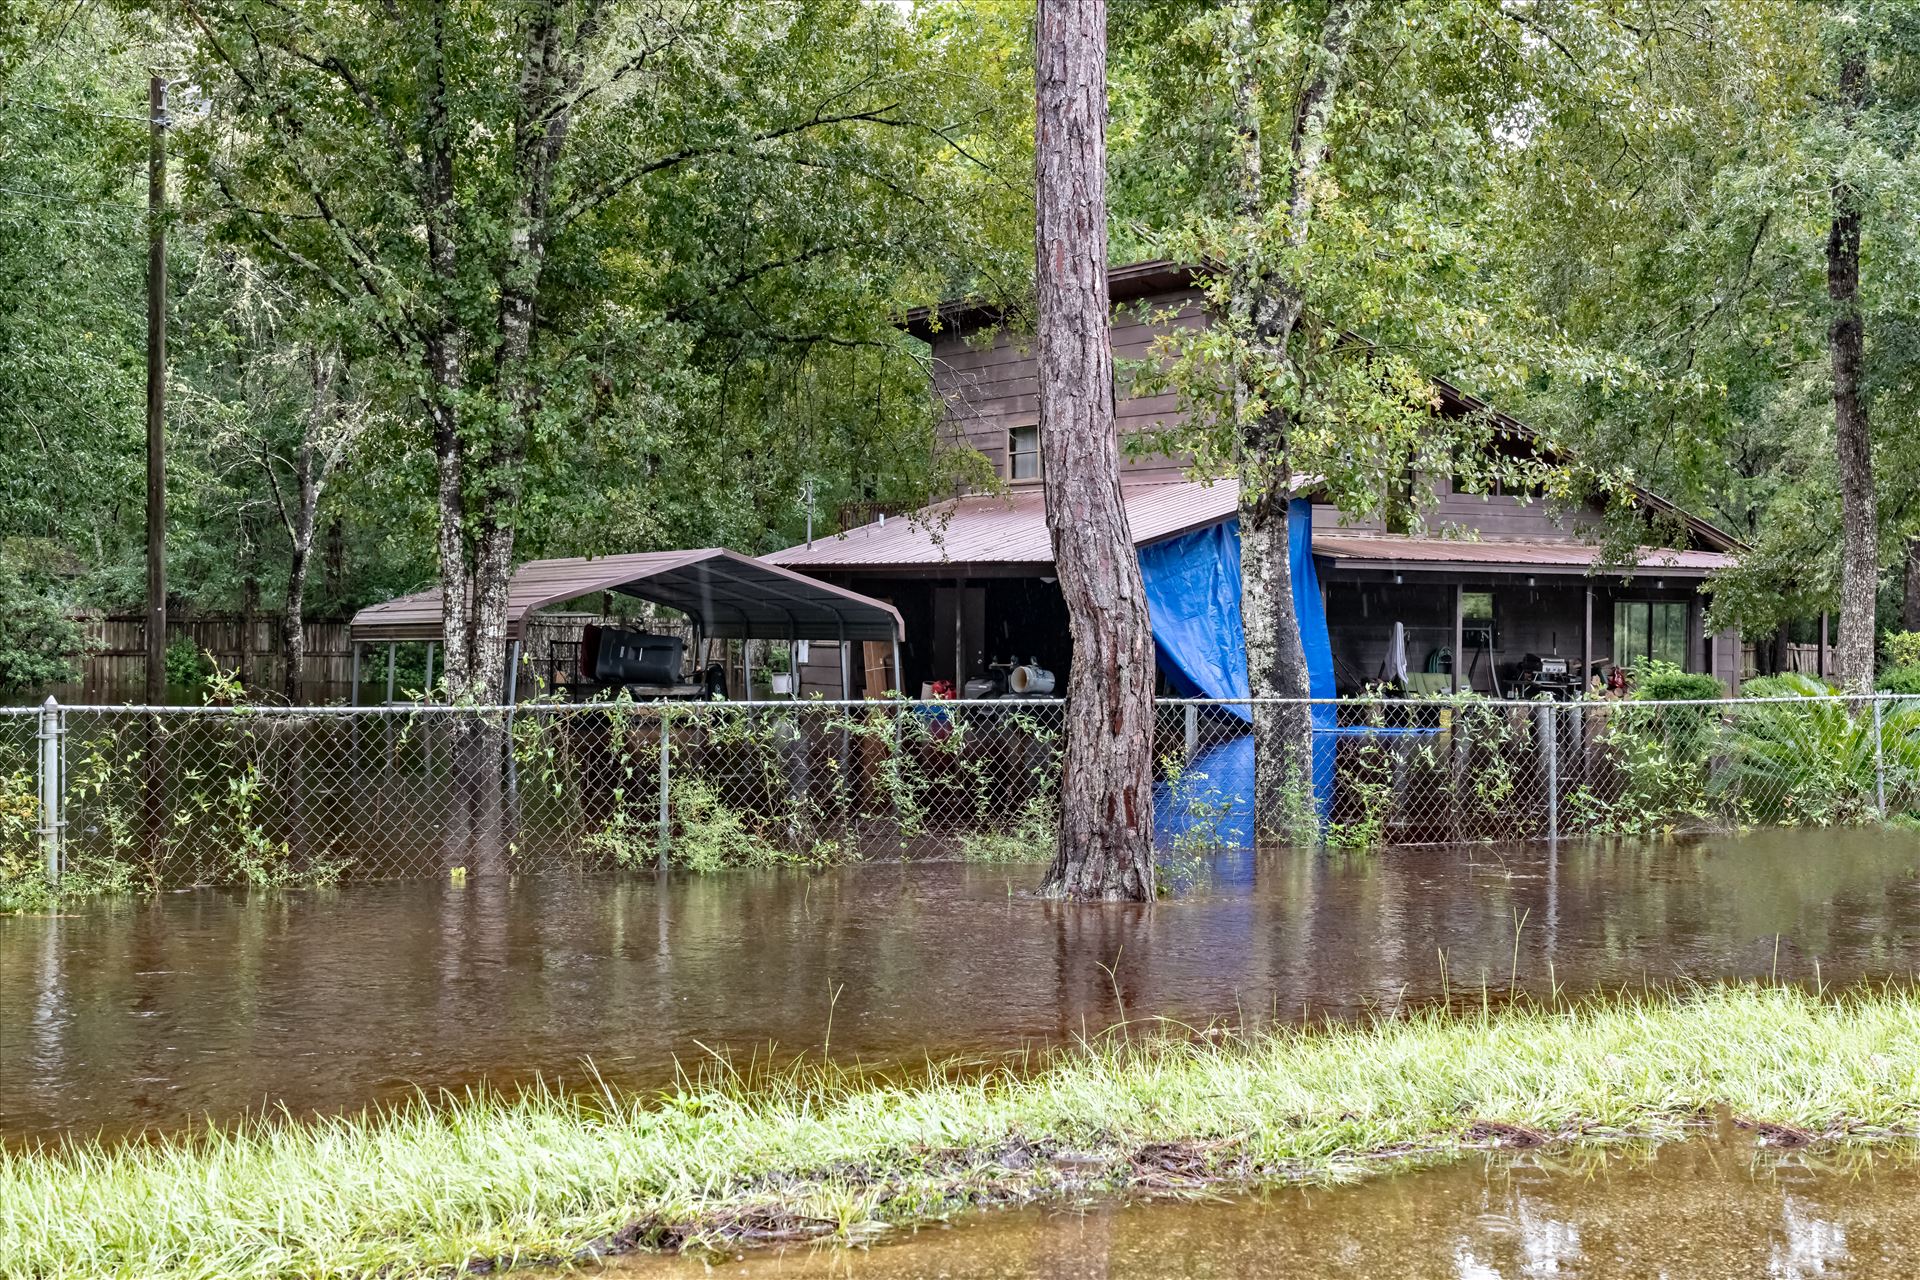 bear creek out of bank August 02, 2018.jpg - August 02, 2018 heavy rains flooded many parts of Bay County, Florida. This photo is in the Bear Creek area. by Terry Kelly Photography